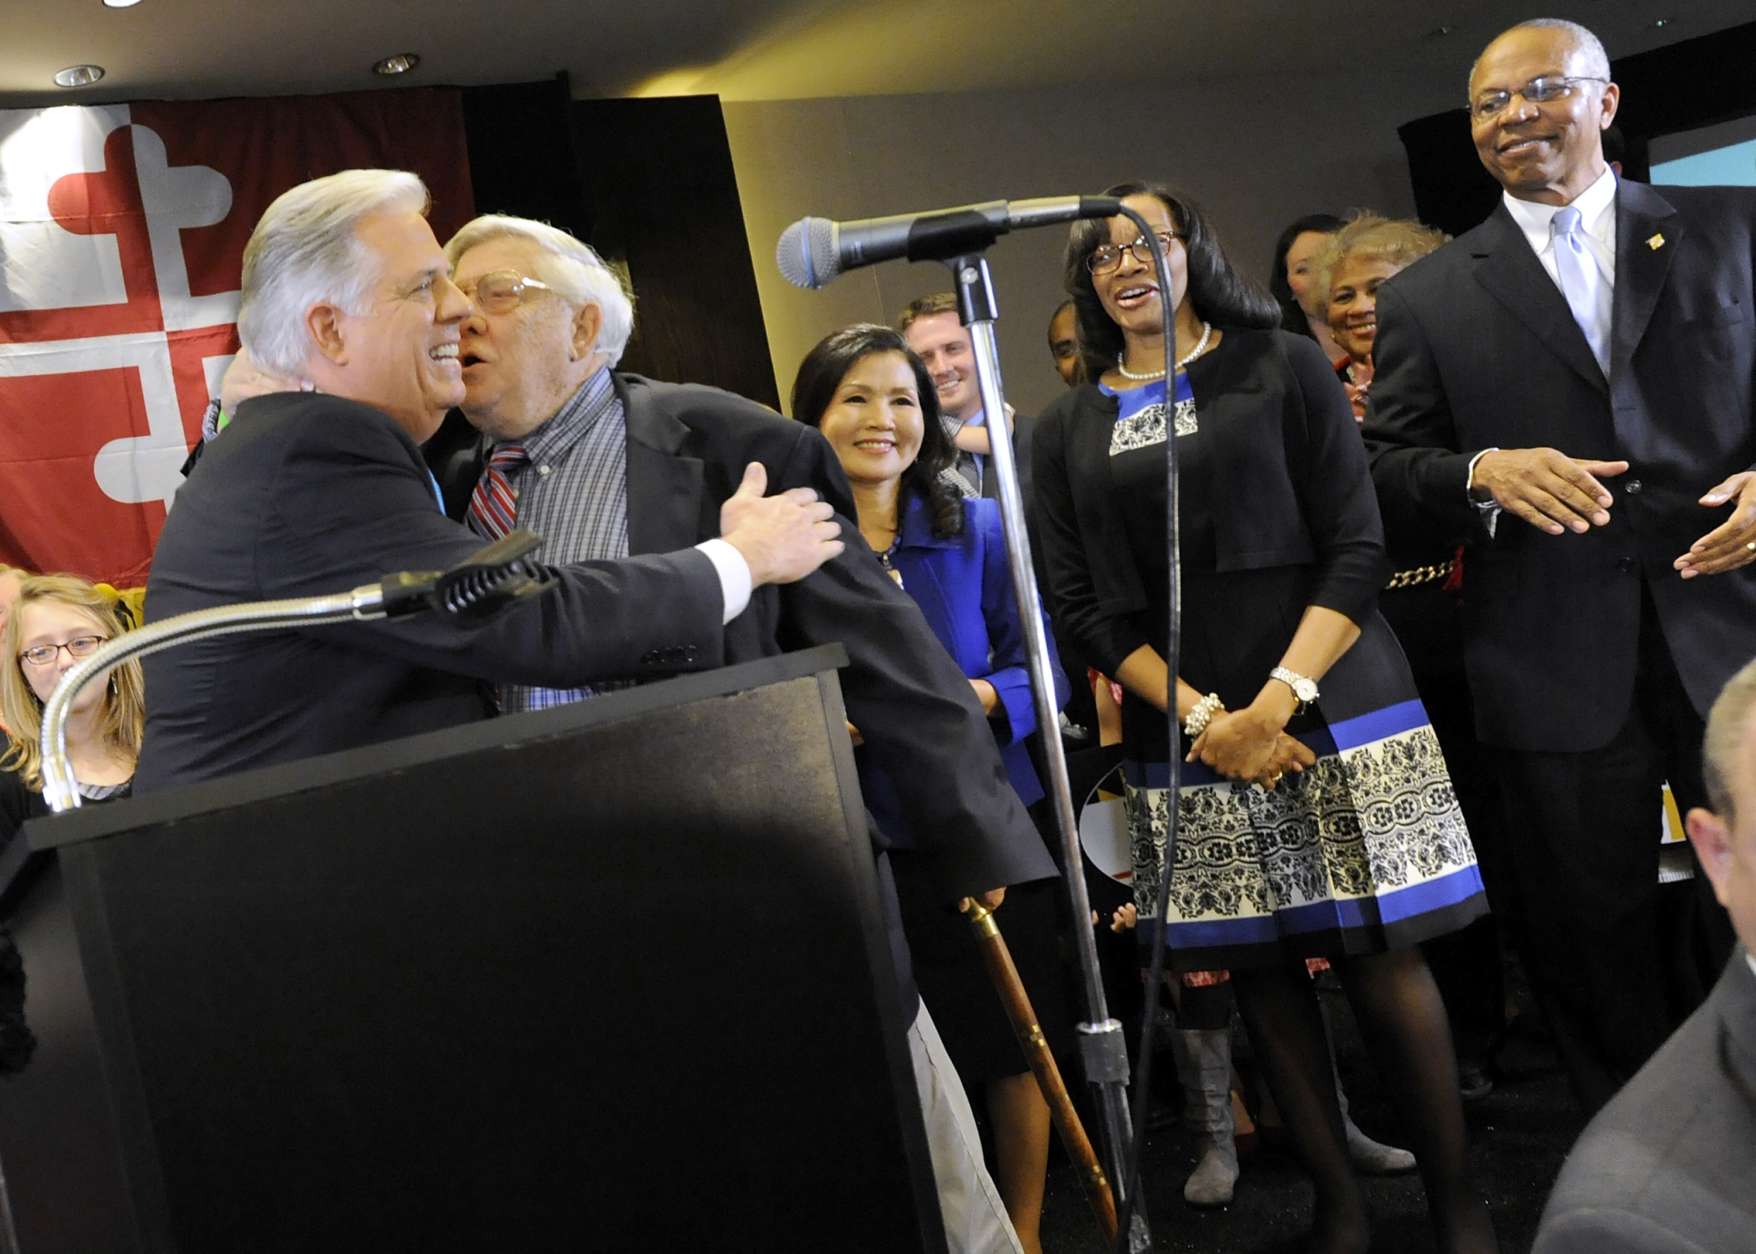 Maryland Gov.-elect Larry Hogan, left, a Republican, hugs his father, former U.S. Congressman Lawrence Hogan, second from left, after beating Democrat Anthony Brown, not pictured, in the state's gubernatorial race Wednesday, Nov. 5, 2014 in Annapolis, Md. Also standing on stage with Hogan are his wife Yumi, third from left, running mate Boyd Rutherford, right, and Rutherford's wife, Monica, second from right. (AP Photo/Steve Ruark)